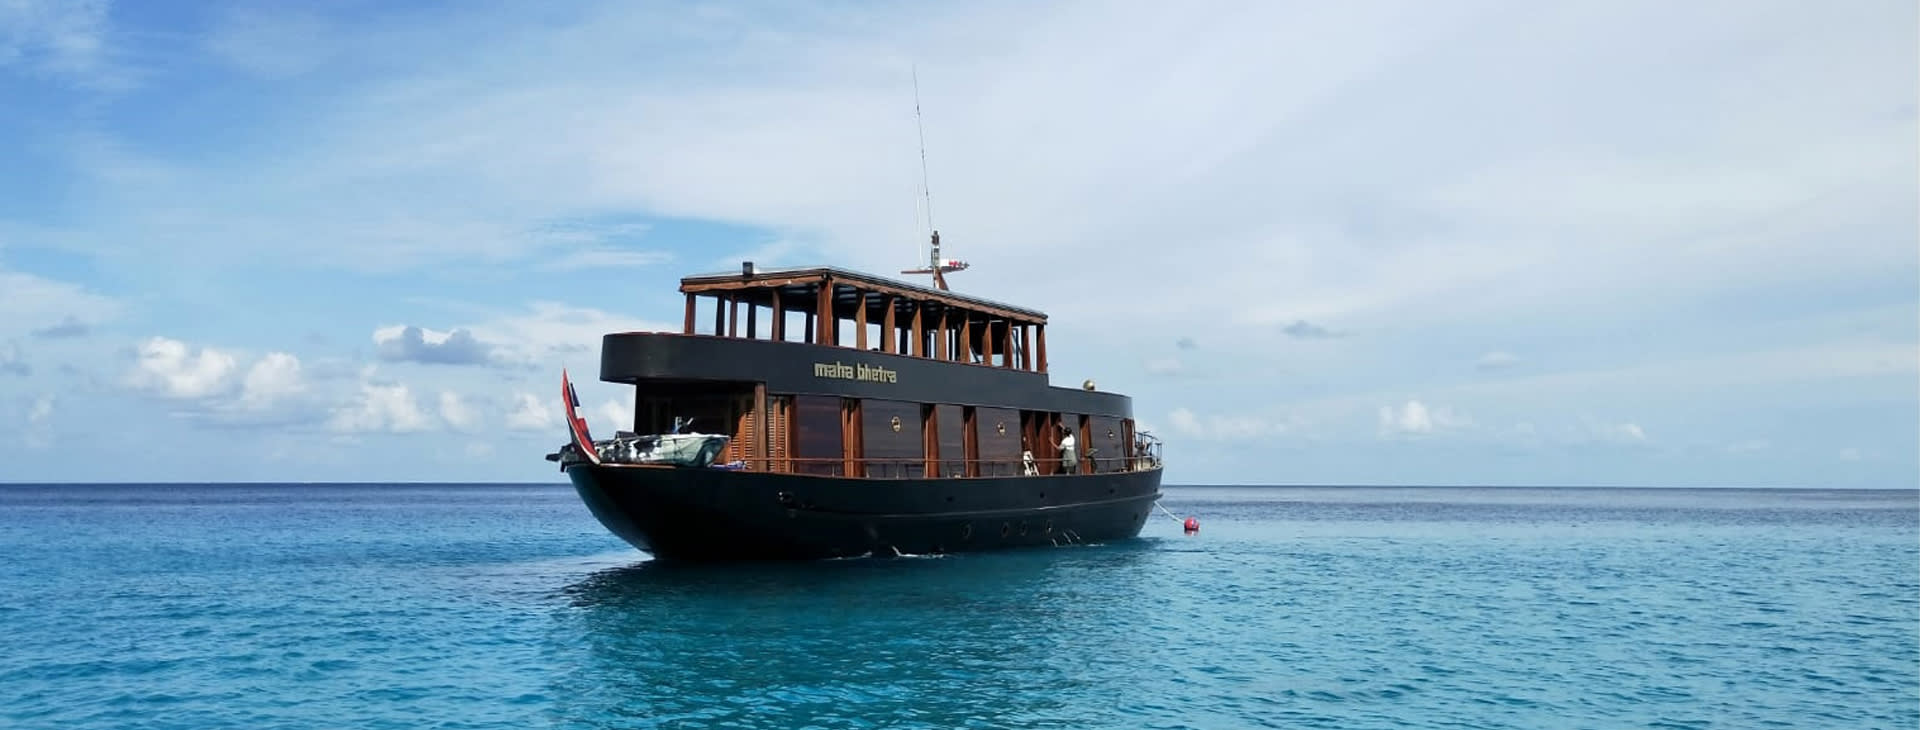 Andaman Islands  4 Unique Yachting Itineraries For An Unforgettable 12 Days Cruise